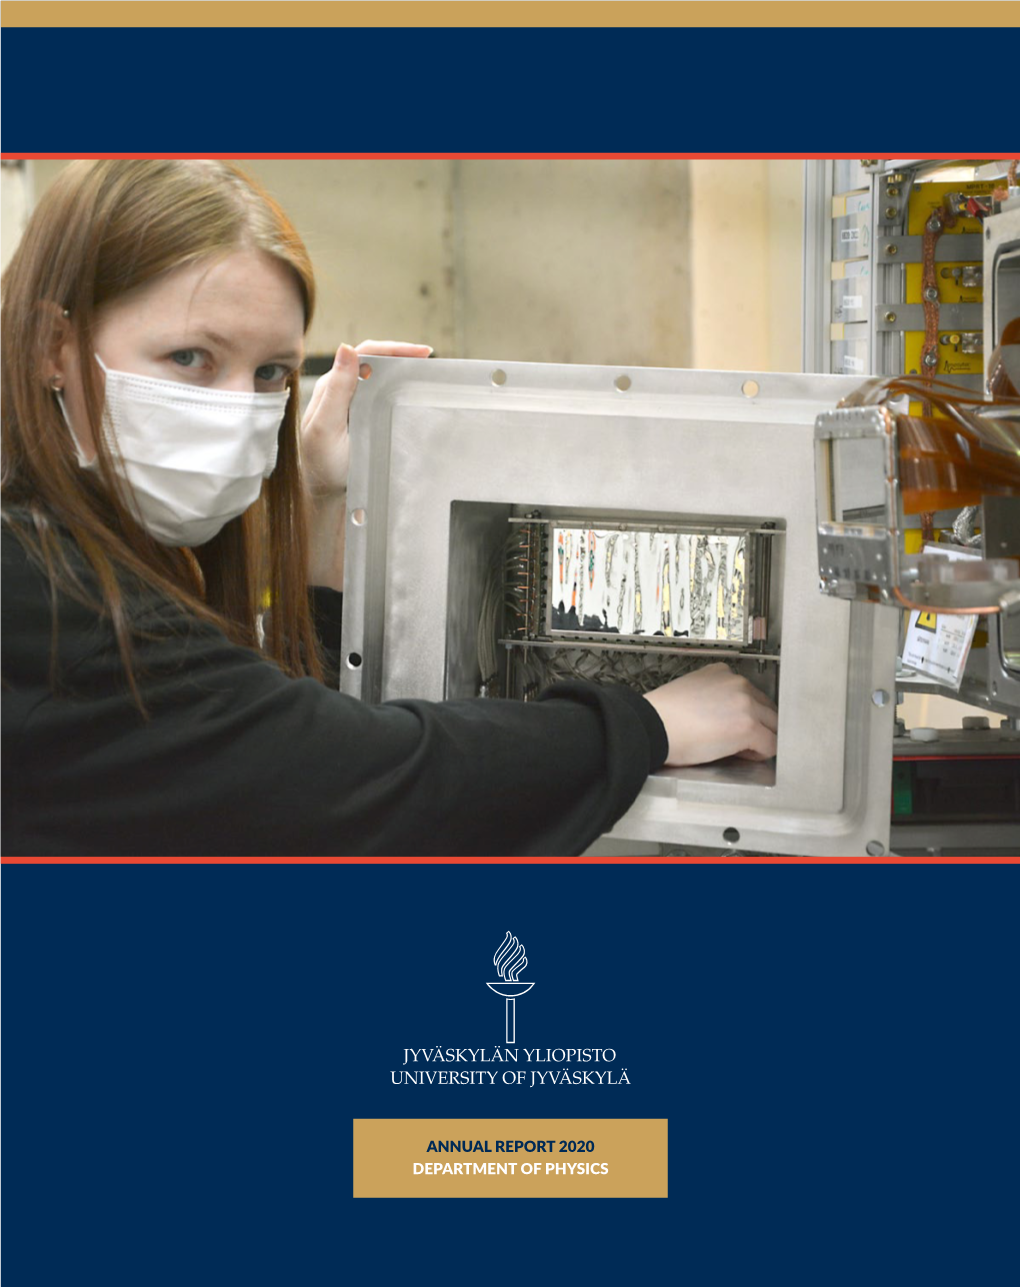 Annual Report 2020 of the Department of Physics